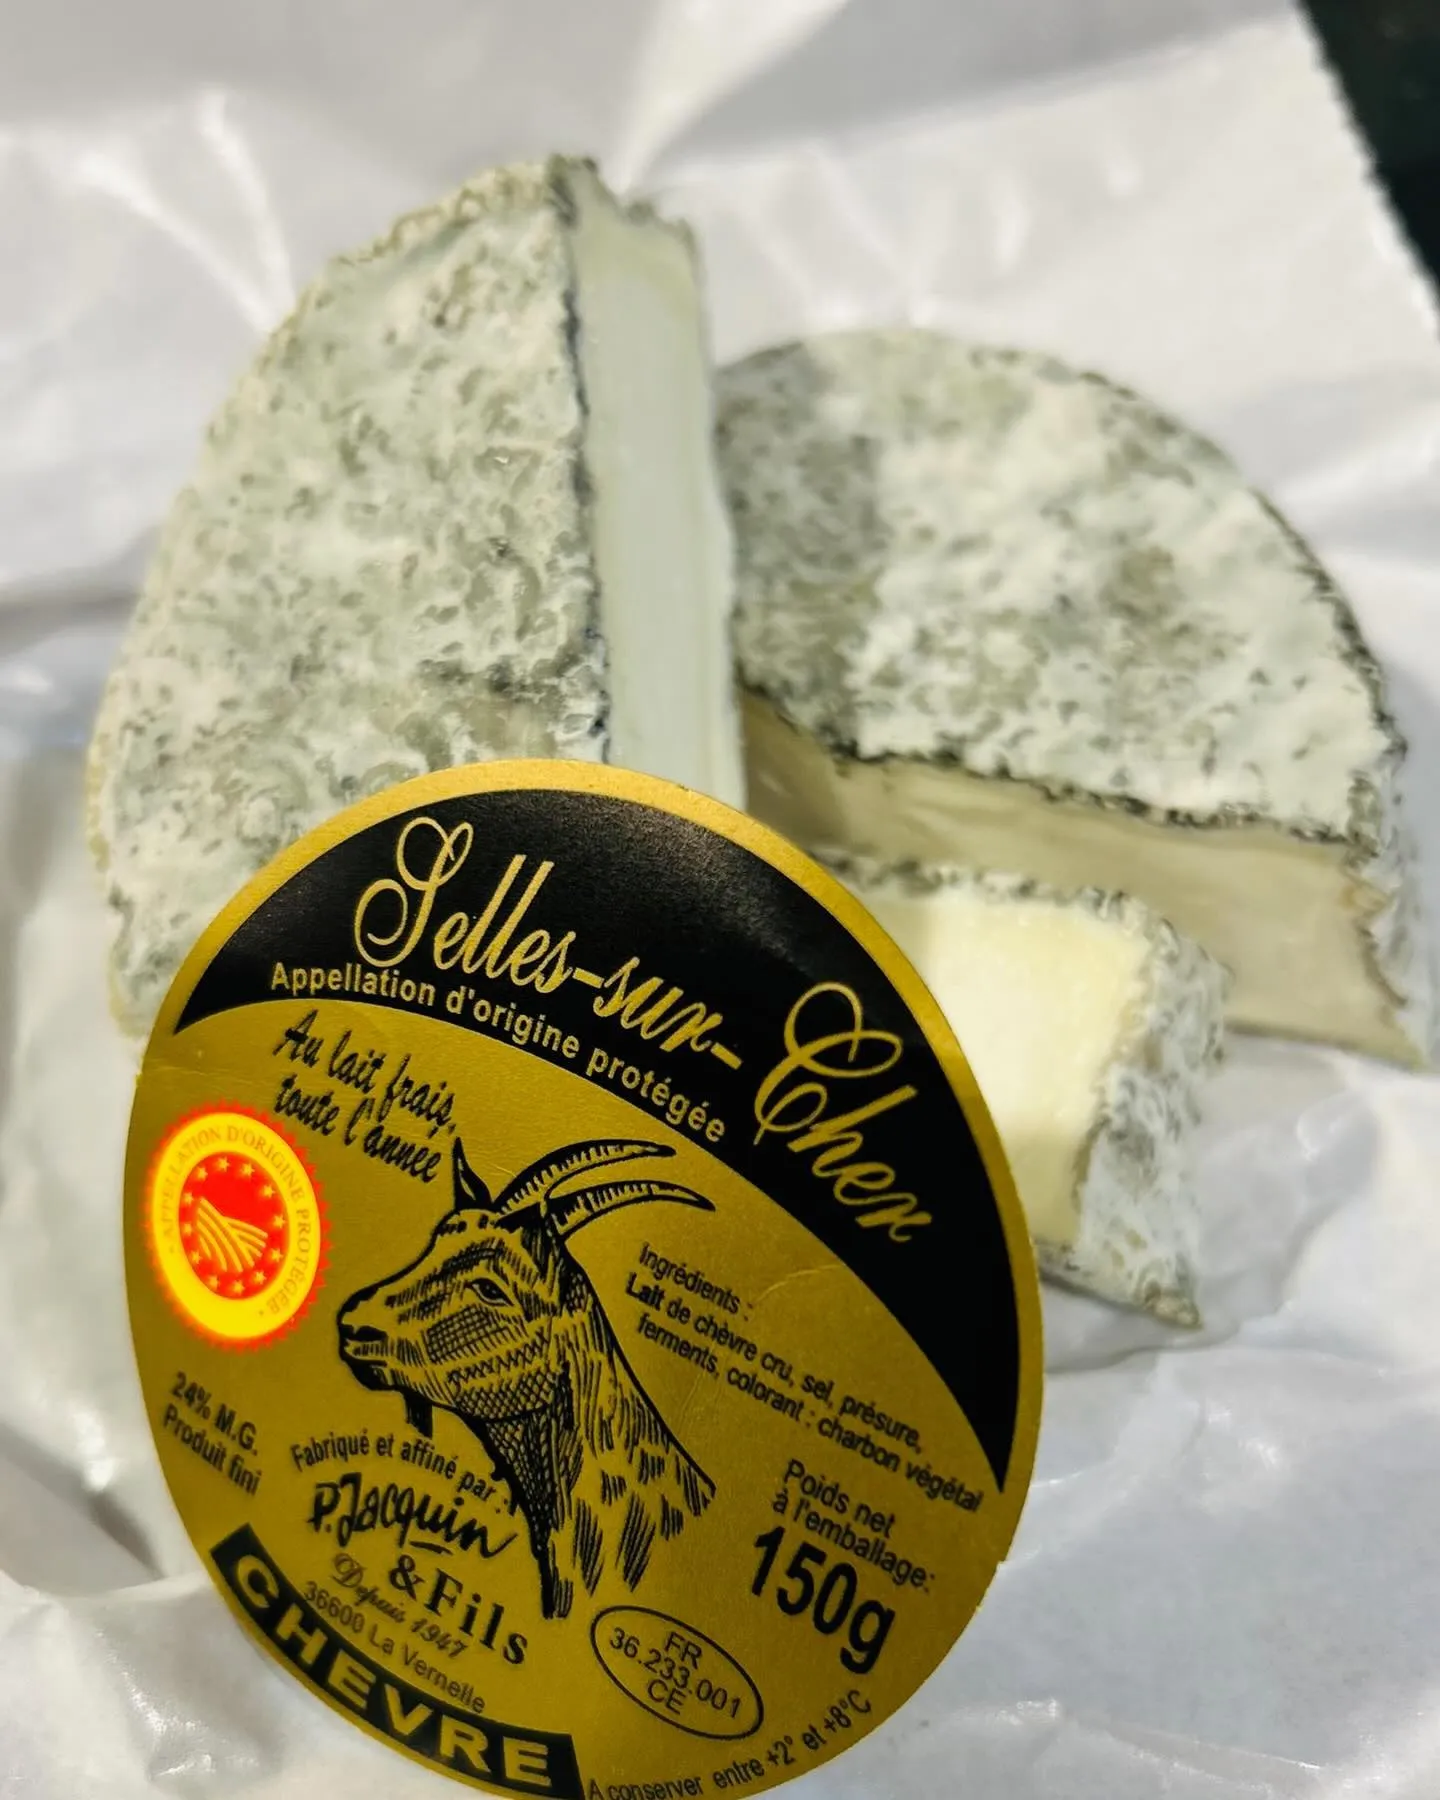 🧀Selles-sur-sher【セルシュールシェール】🧀